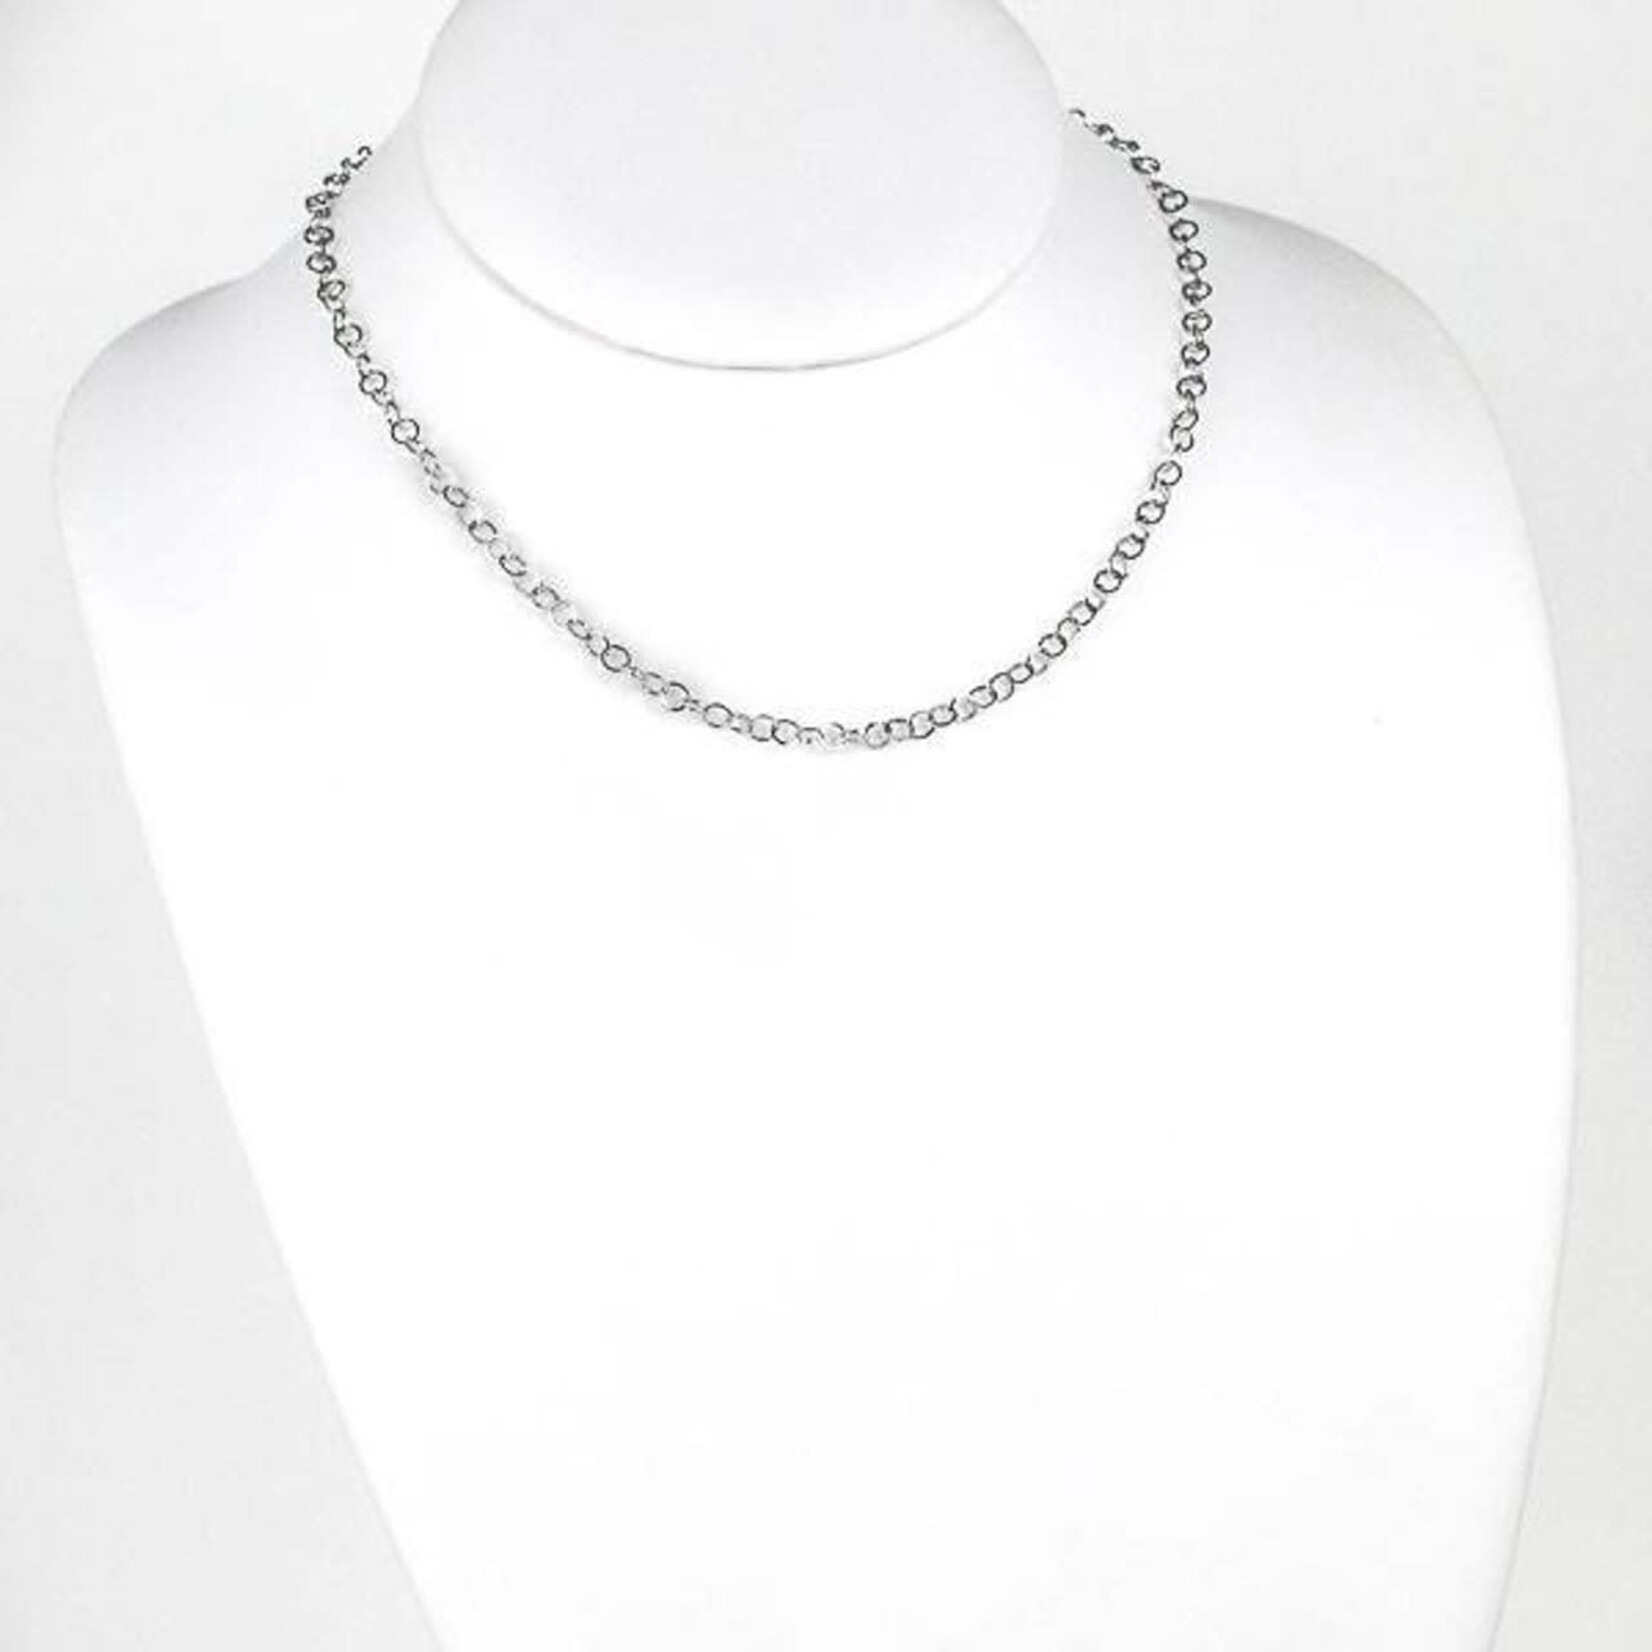 Silver Stainless Steel 4mm Cable Chain 16" Necklace - Ready to Wear